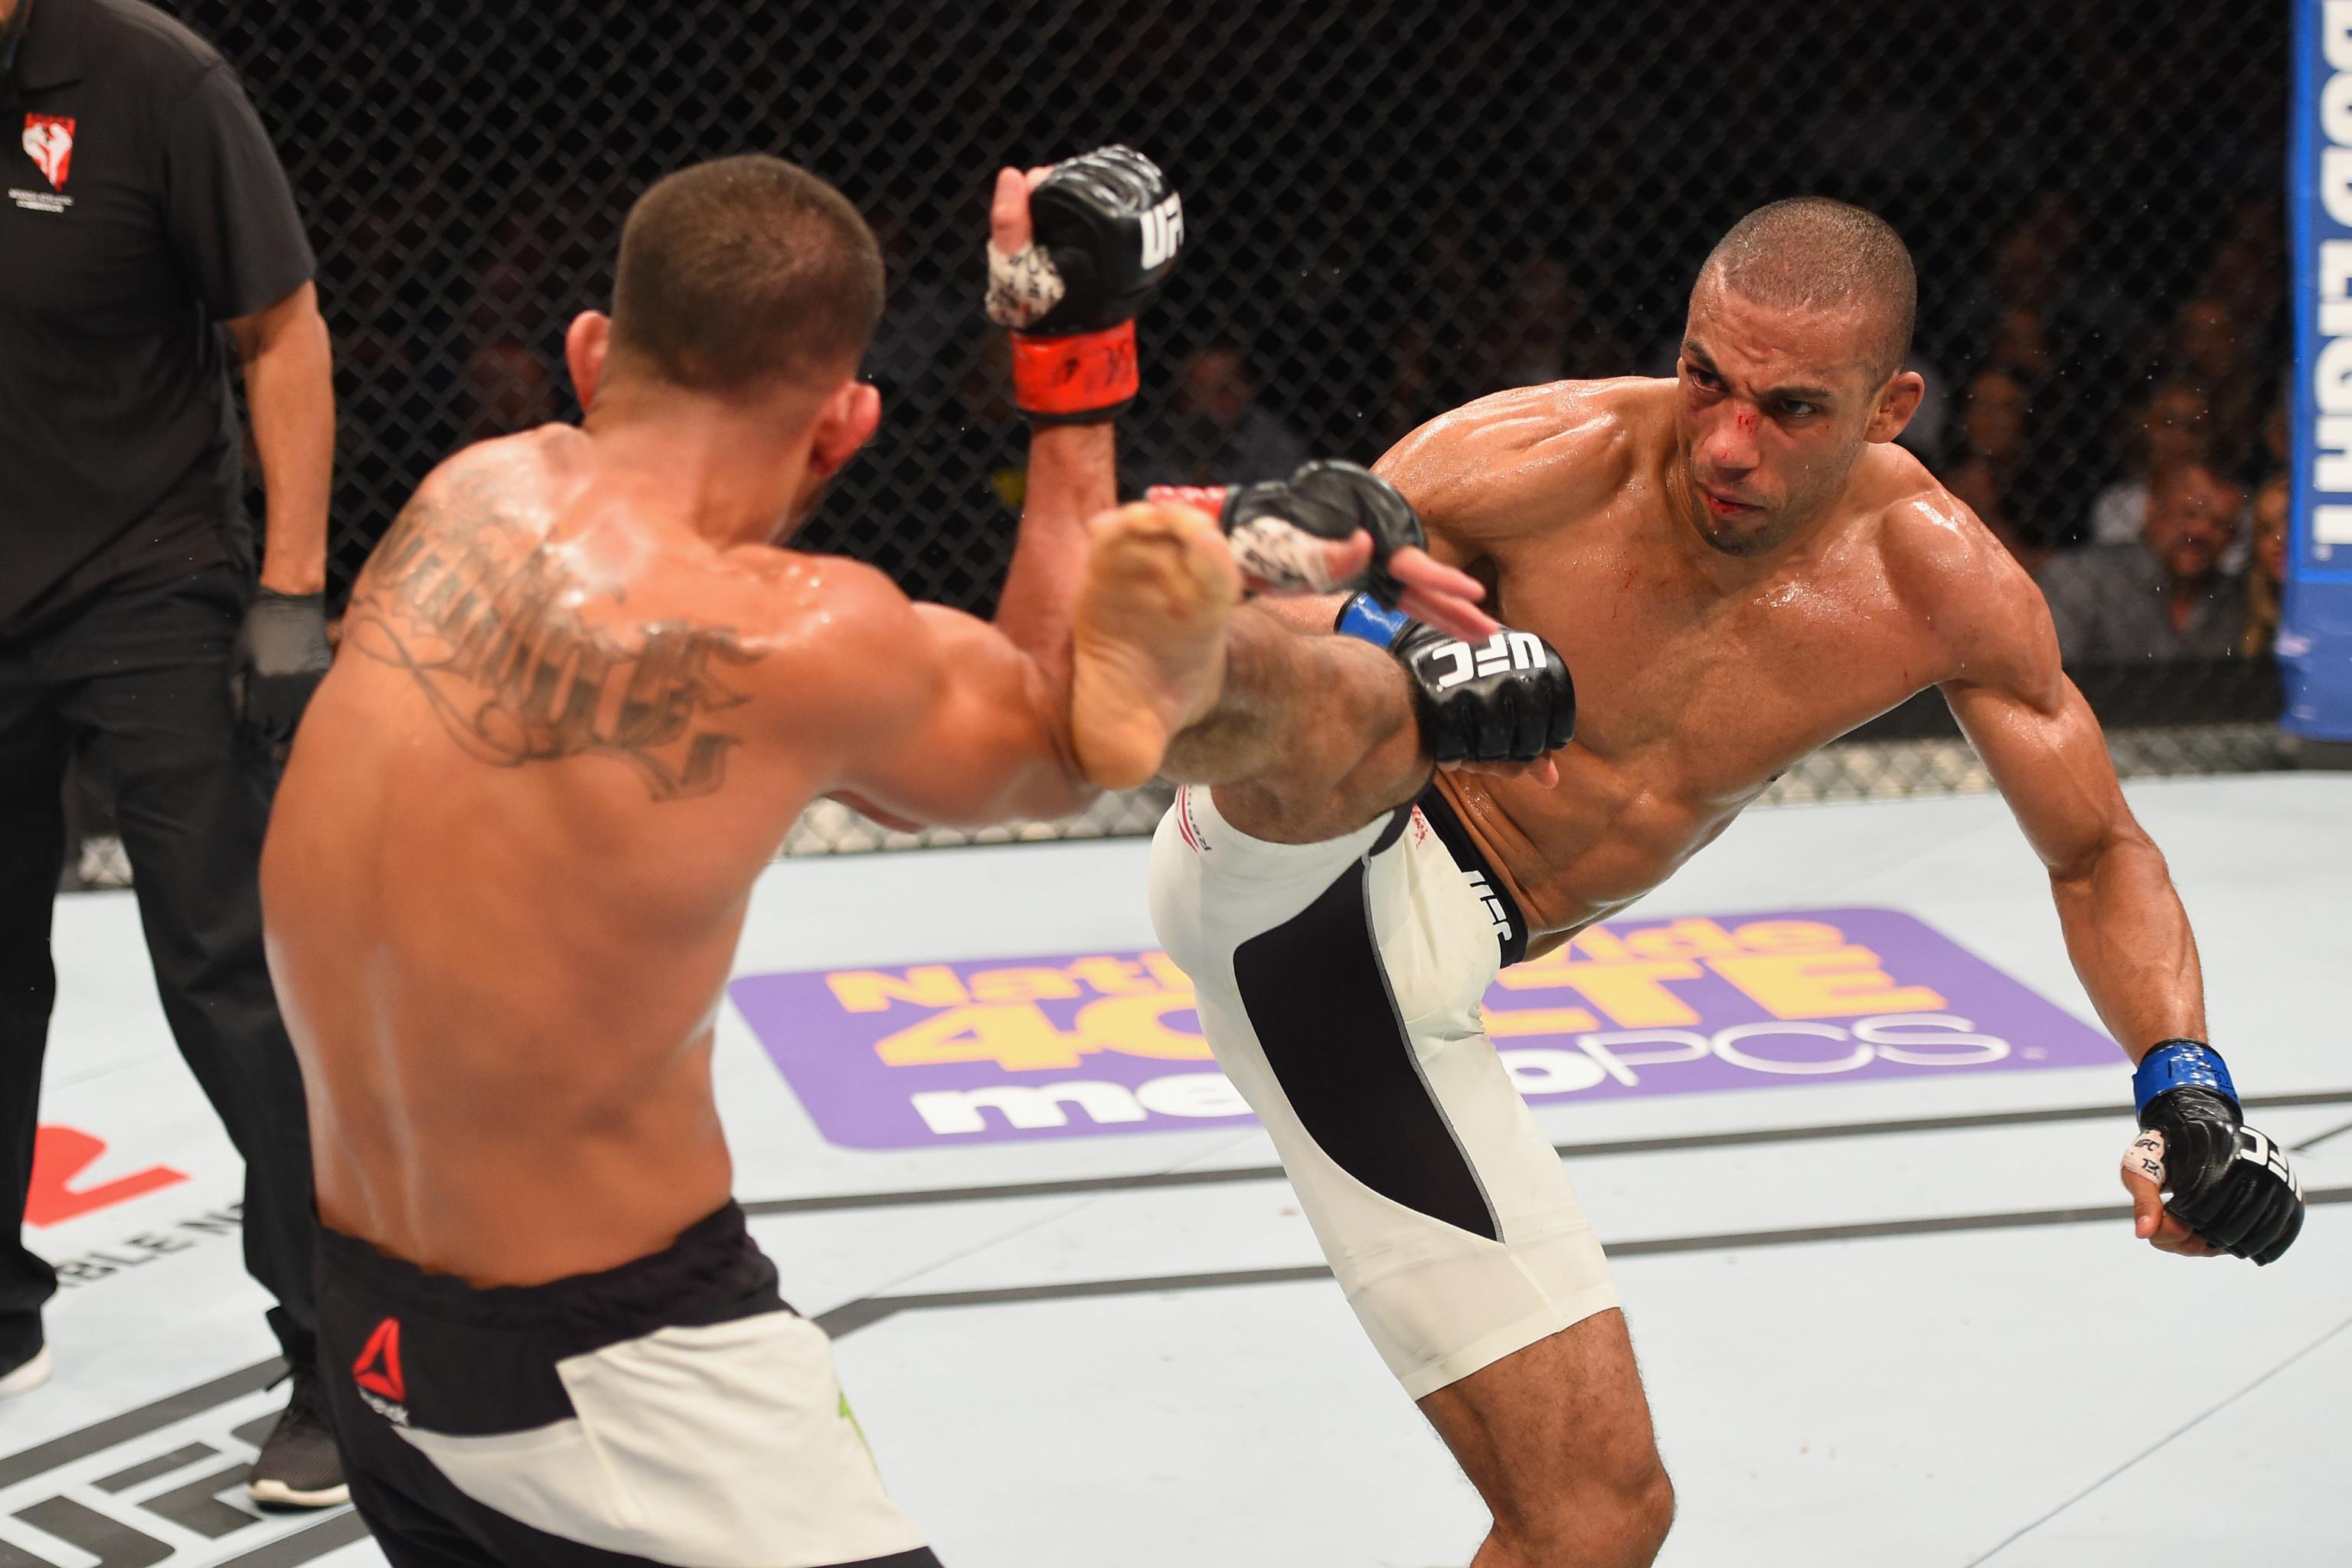 Ufc 197 Edson Barboza Defeats Former Champ Anthony Pettis By Unanimous Decision Bleacher Report Latest News Videos And Highlights